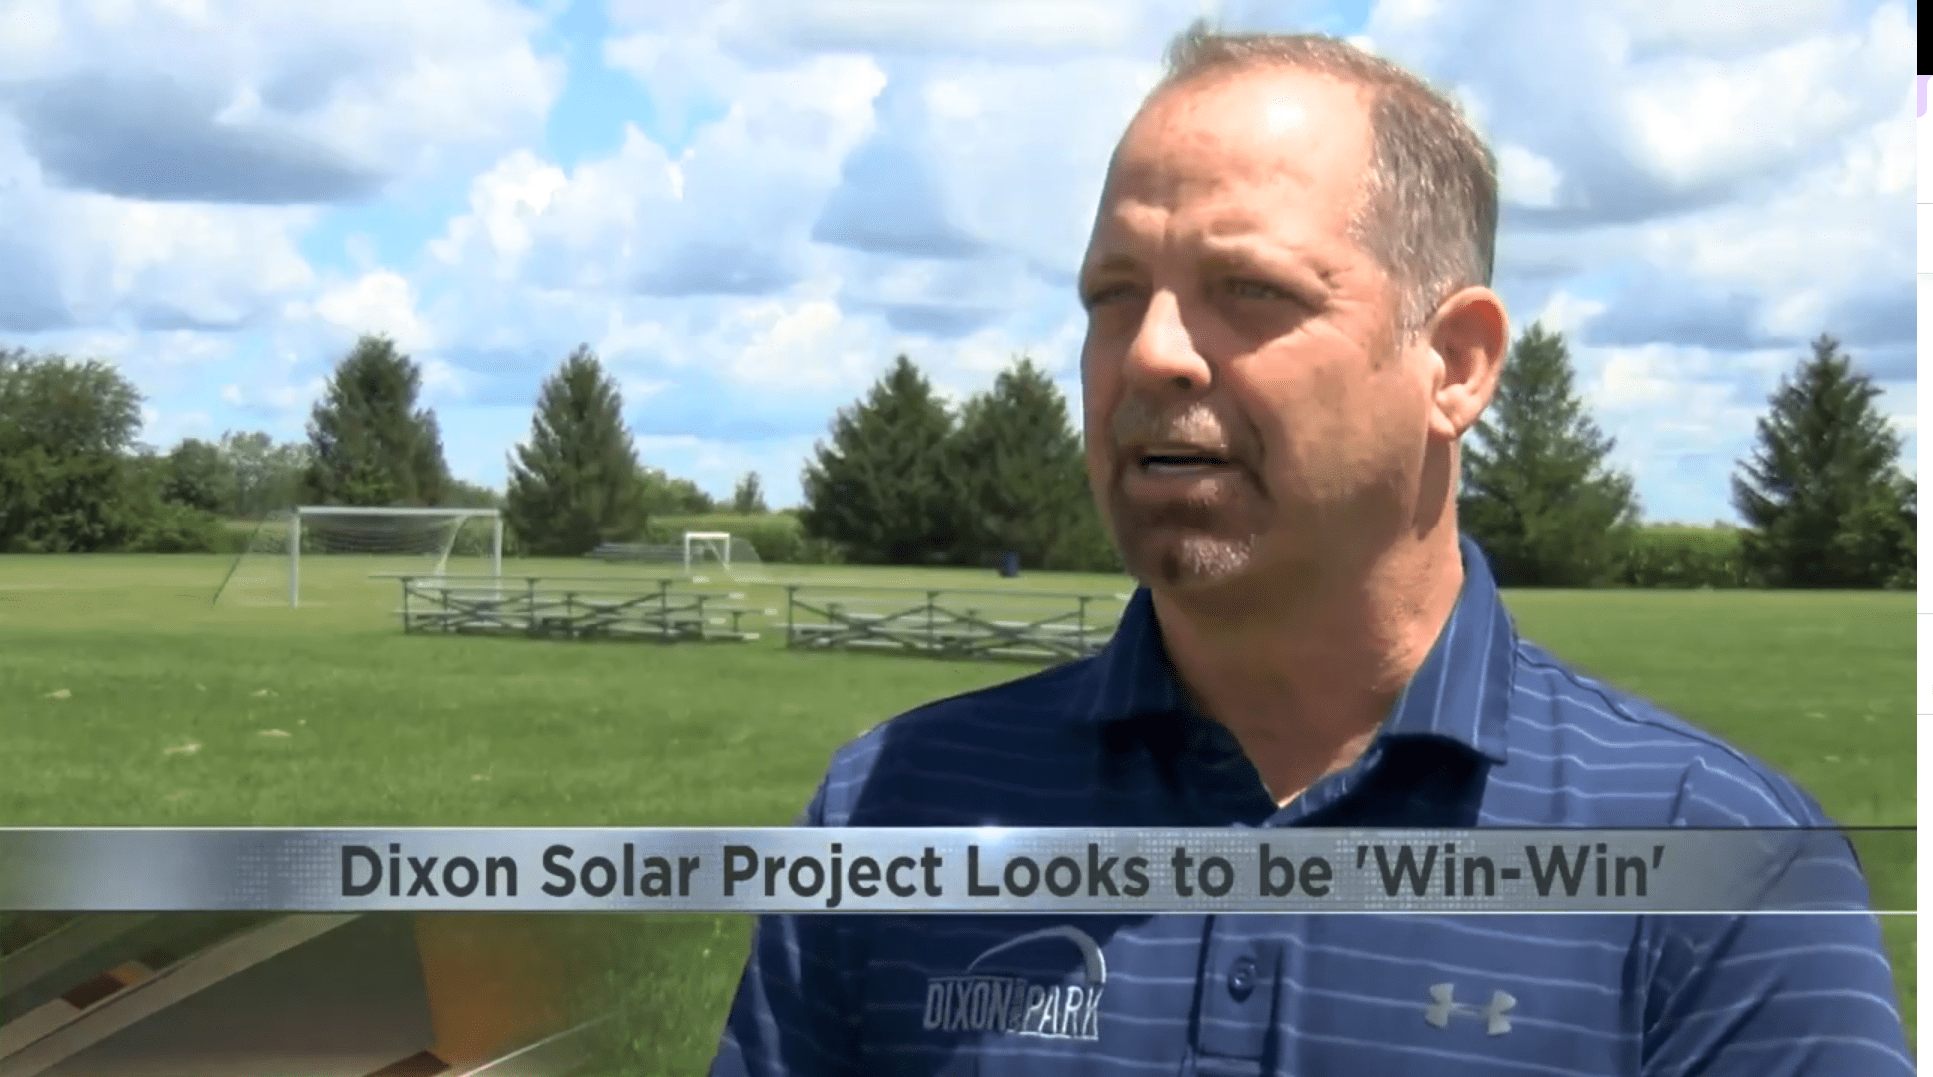 Dixon solar project looks to save people money and create more fun for kids